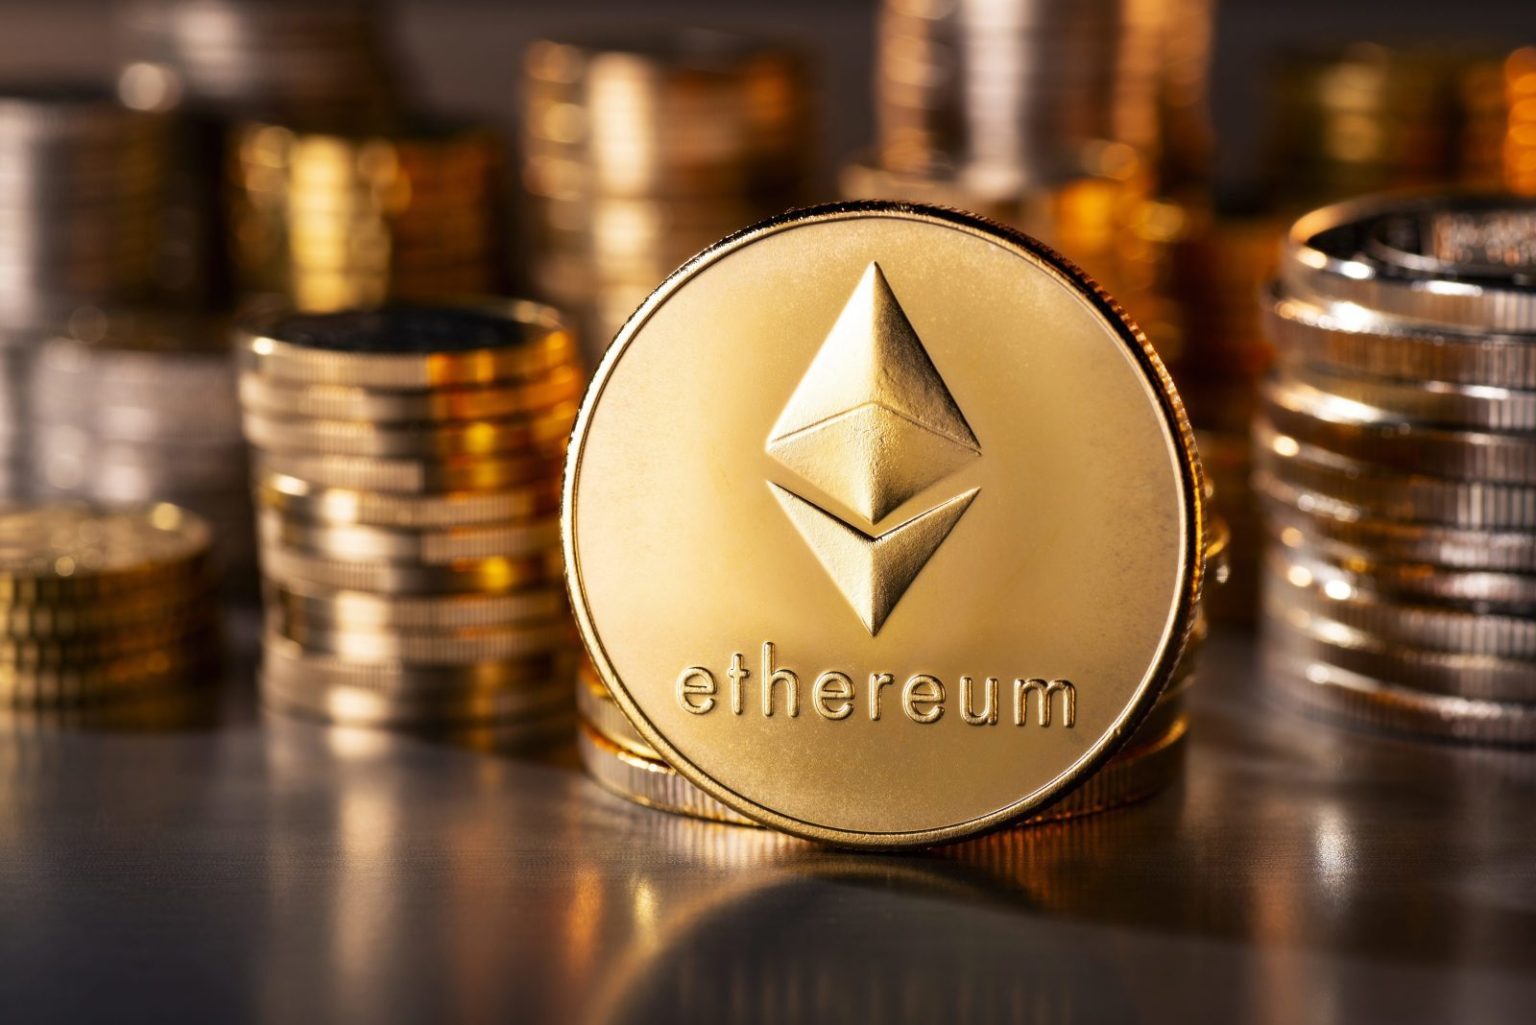 ETH Rallies on September ‘Soft’ Timeline for Upcoming Merge